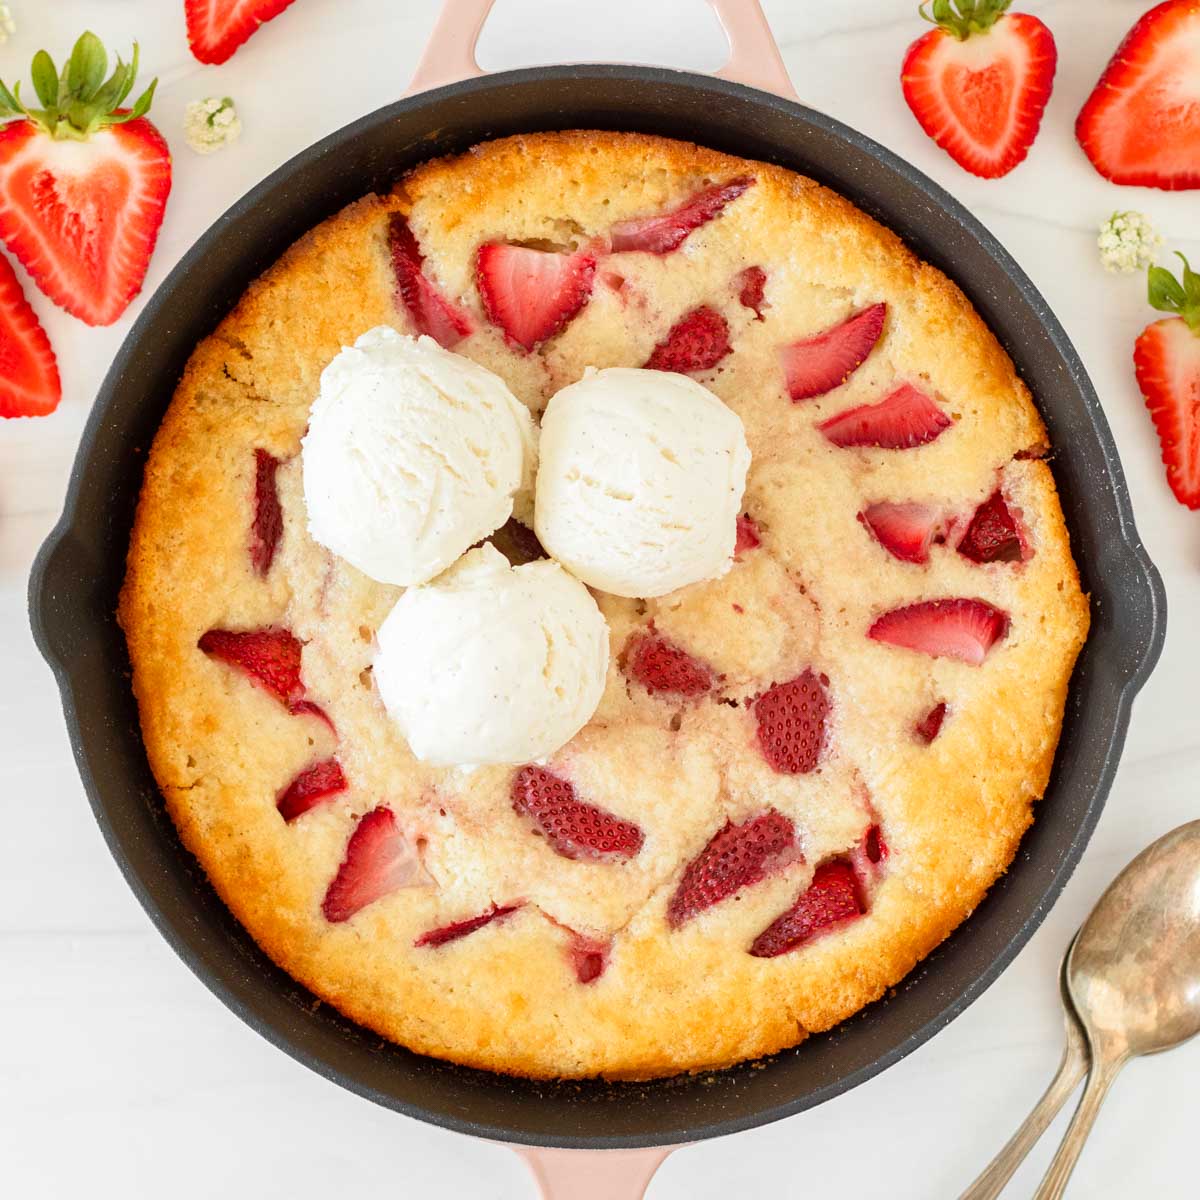 This strawberry cobbler is an easy summer dessert recipe that combines fresh-picked strawberries with a creamy batter to make a delicious one-skillet dessert.